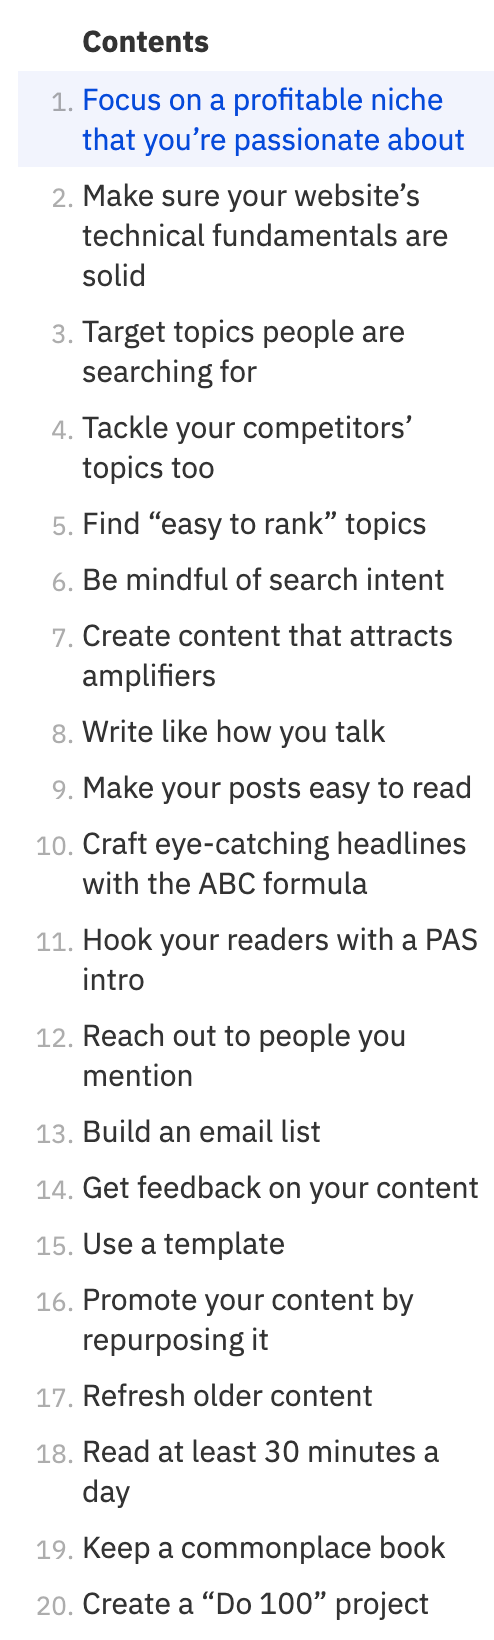 The subheadings of our blogging tips blog post, before it was updated